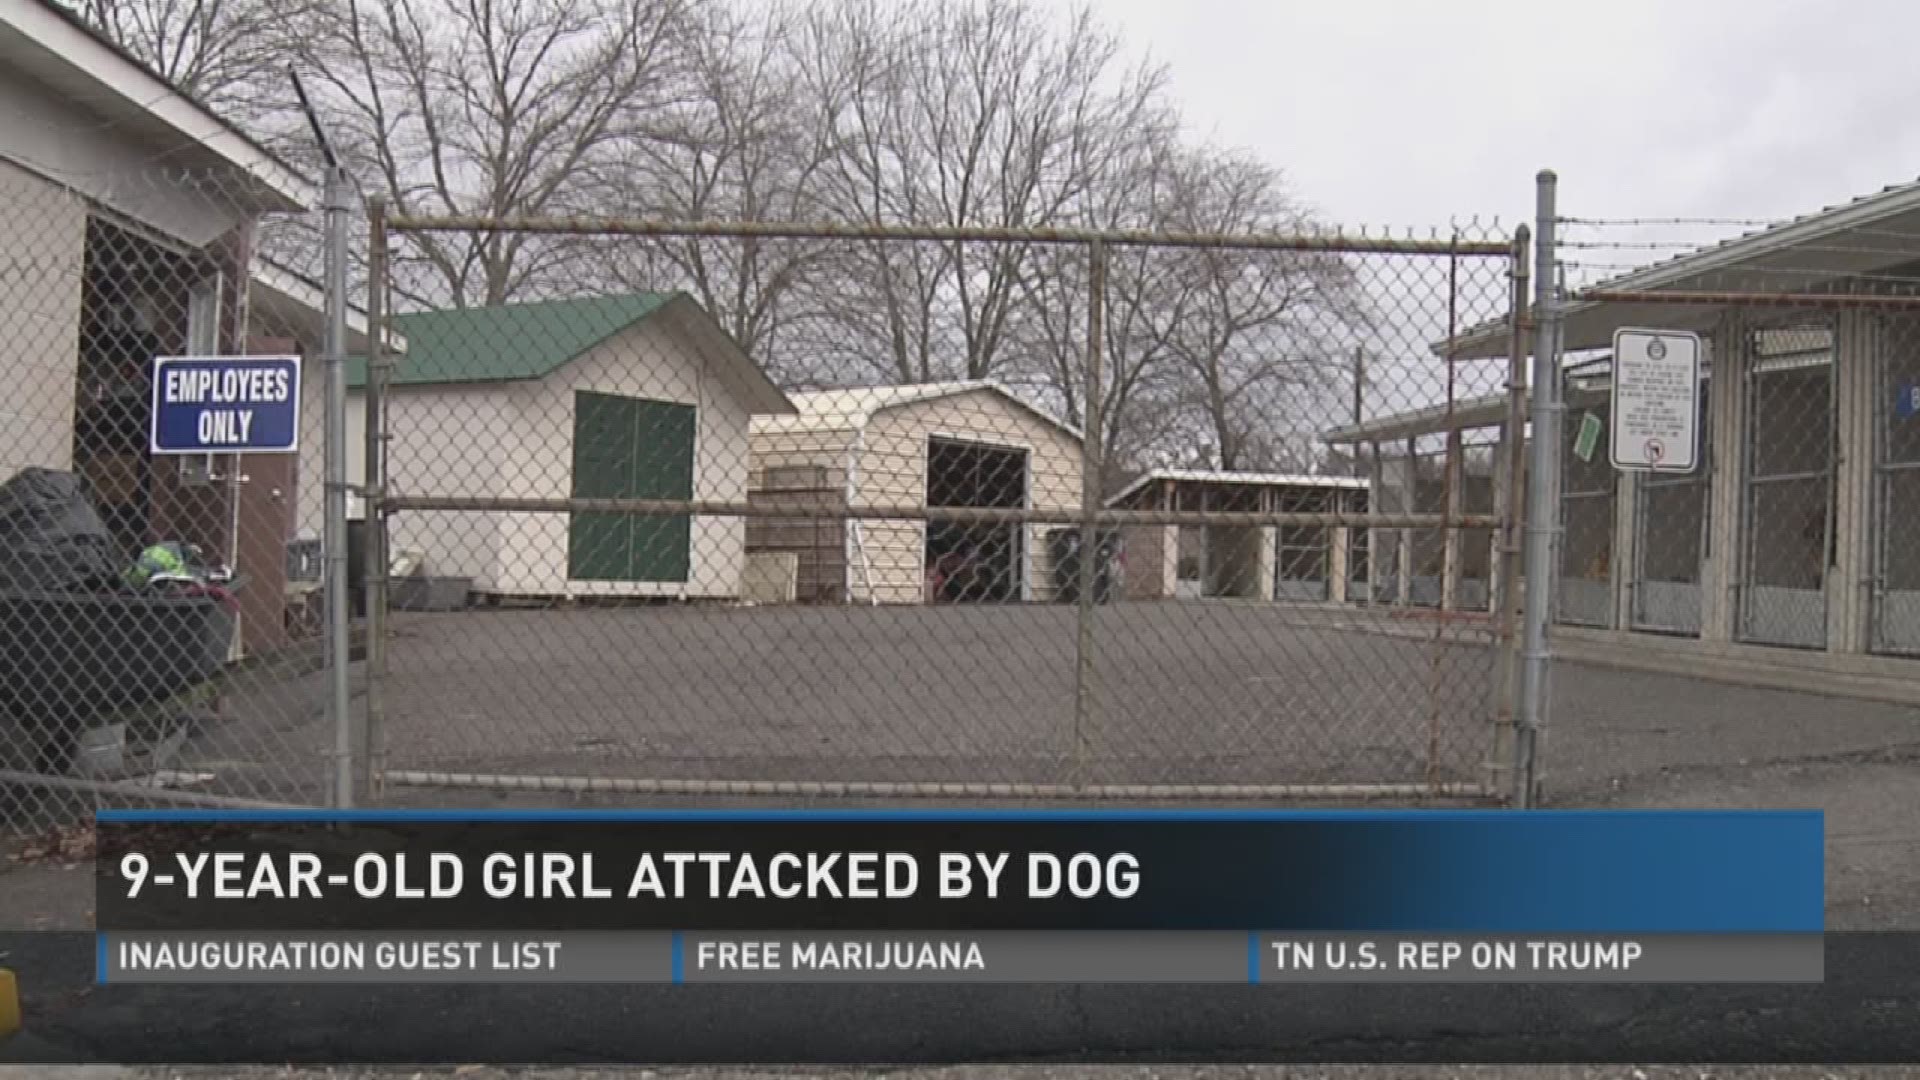 Jan. 3, 2017: An Athens mother is worried a large dog that attached her daughter could hurt another child if authorities fail to find it.